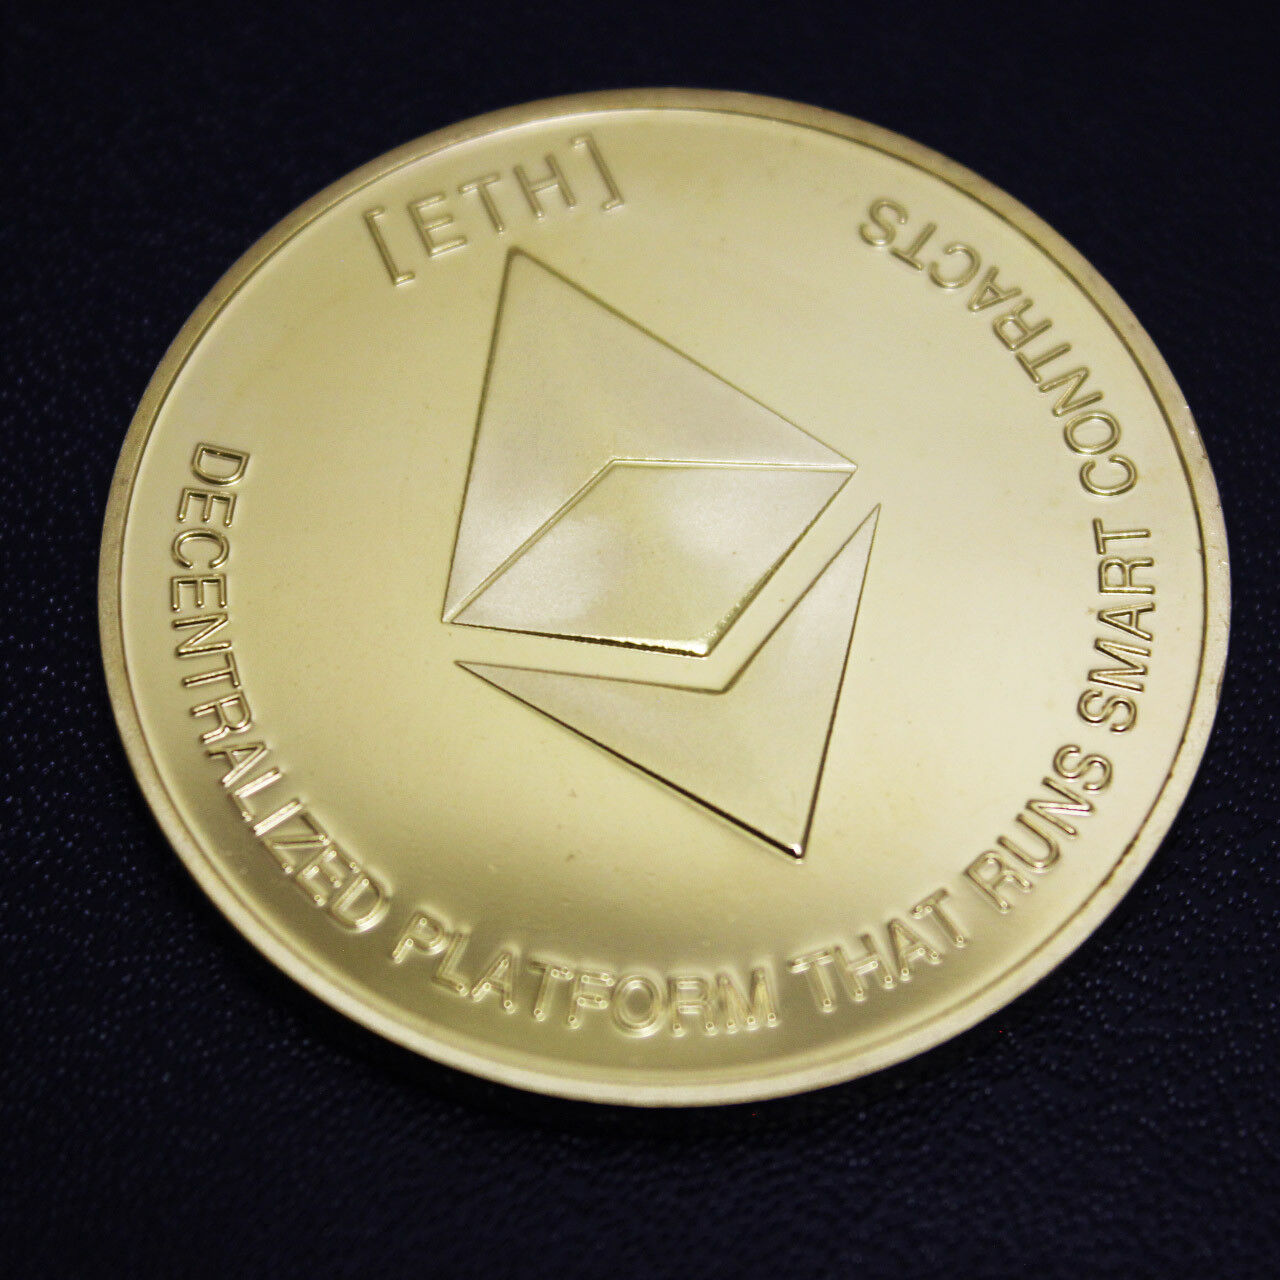 Ethereum Gold Plated Commemorative Coin Collectible Canada FREE FAST SHIPPING